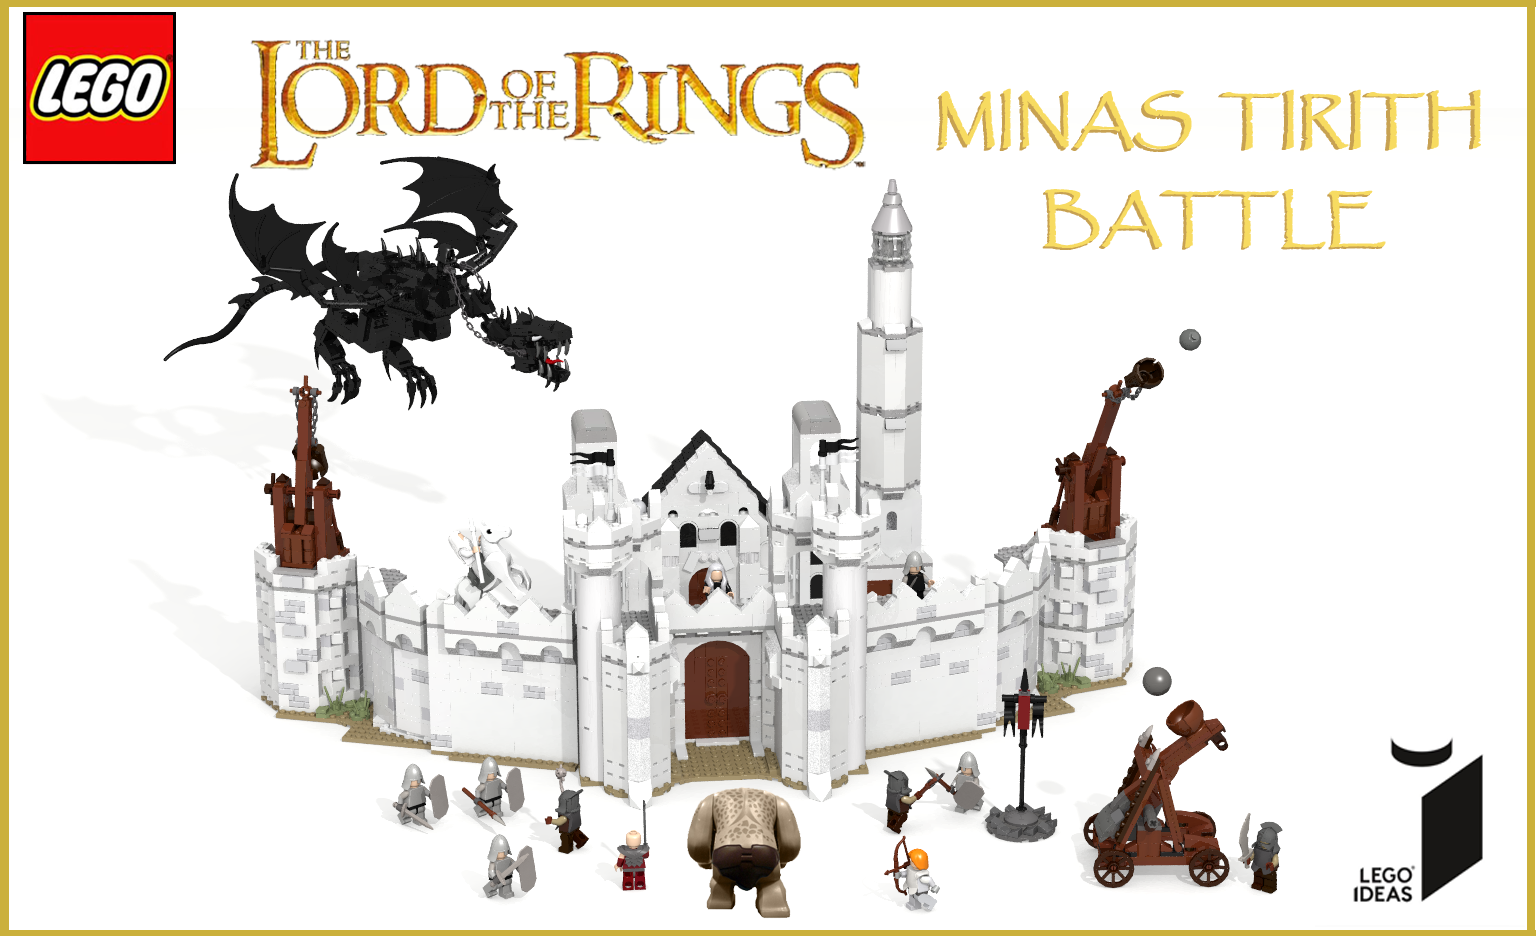 LEGO Model of Main Gate of Minas Tirith, Middle Earth